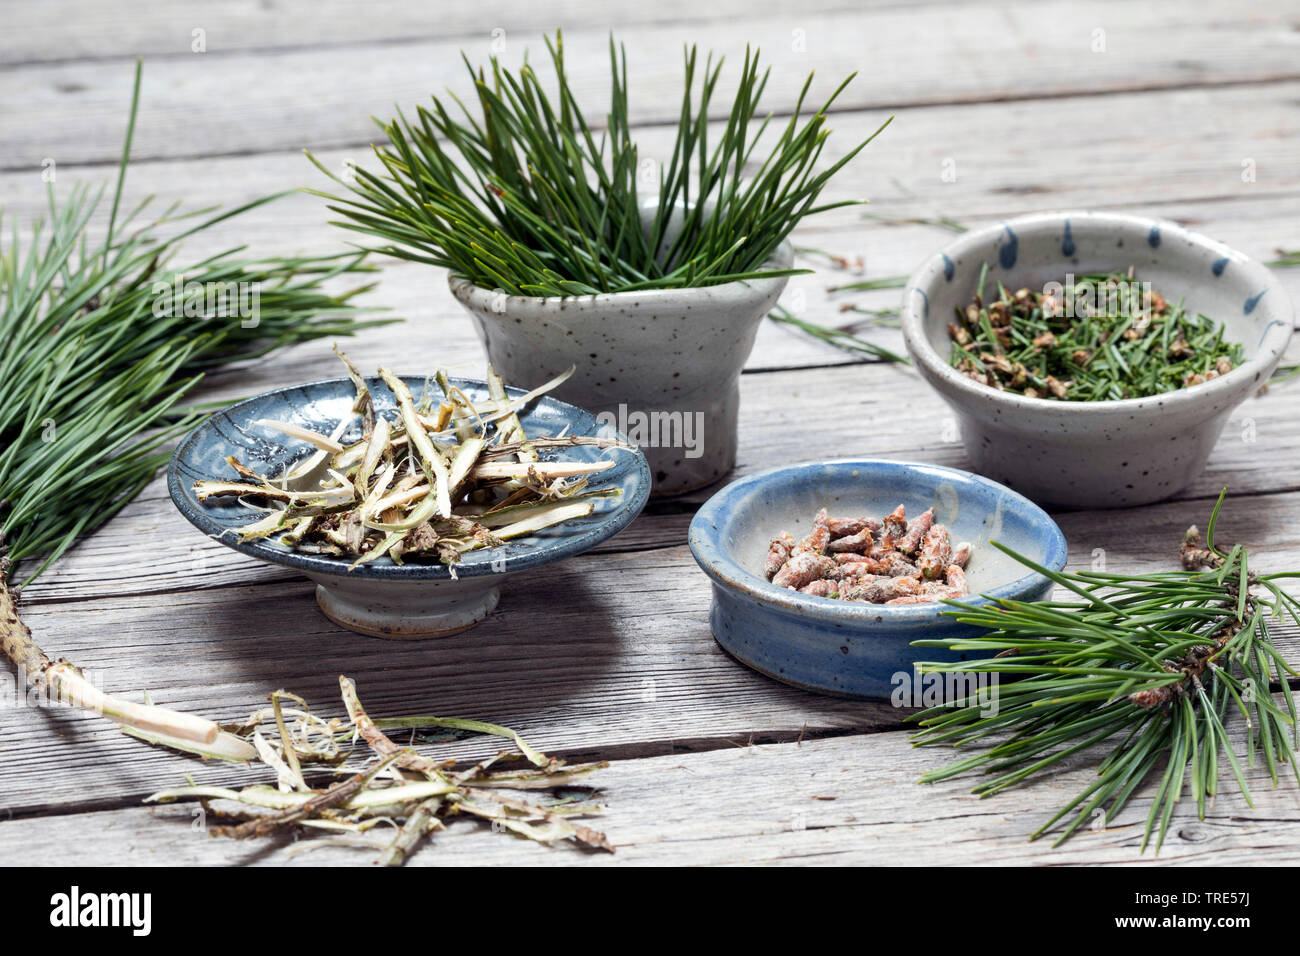 Scotch pine, Scots pine (Pinus sylvestris), collected buds, needles, and bark, Germany Stock Photo